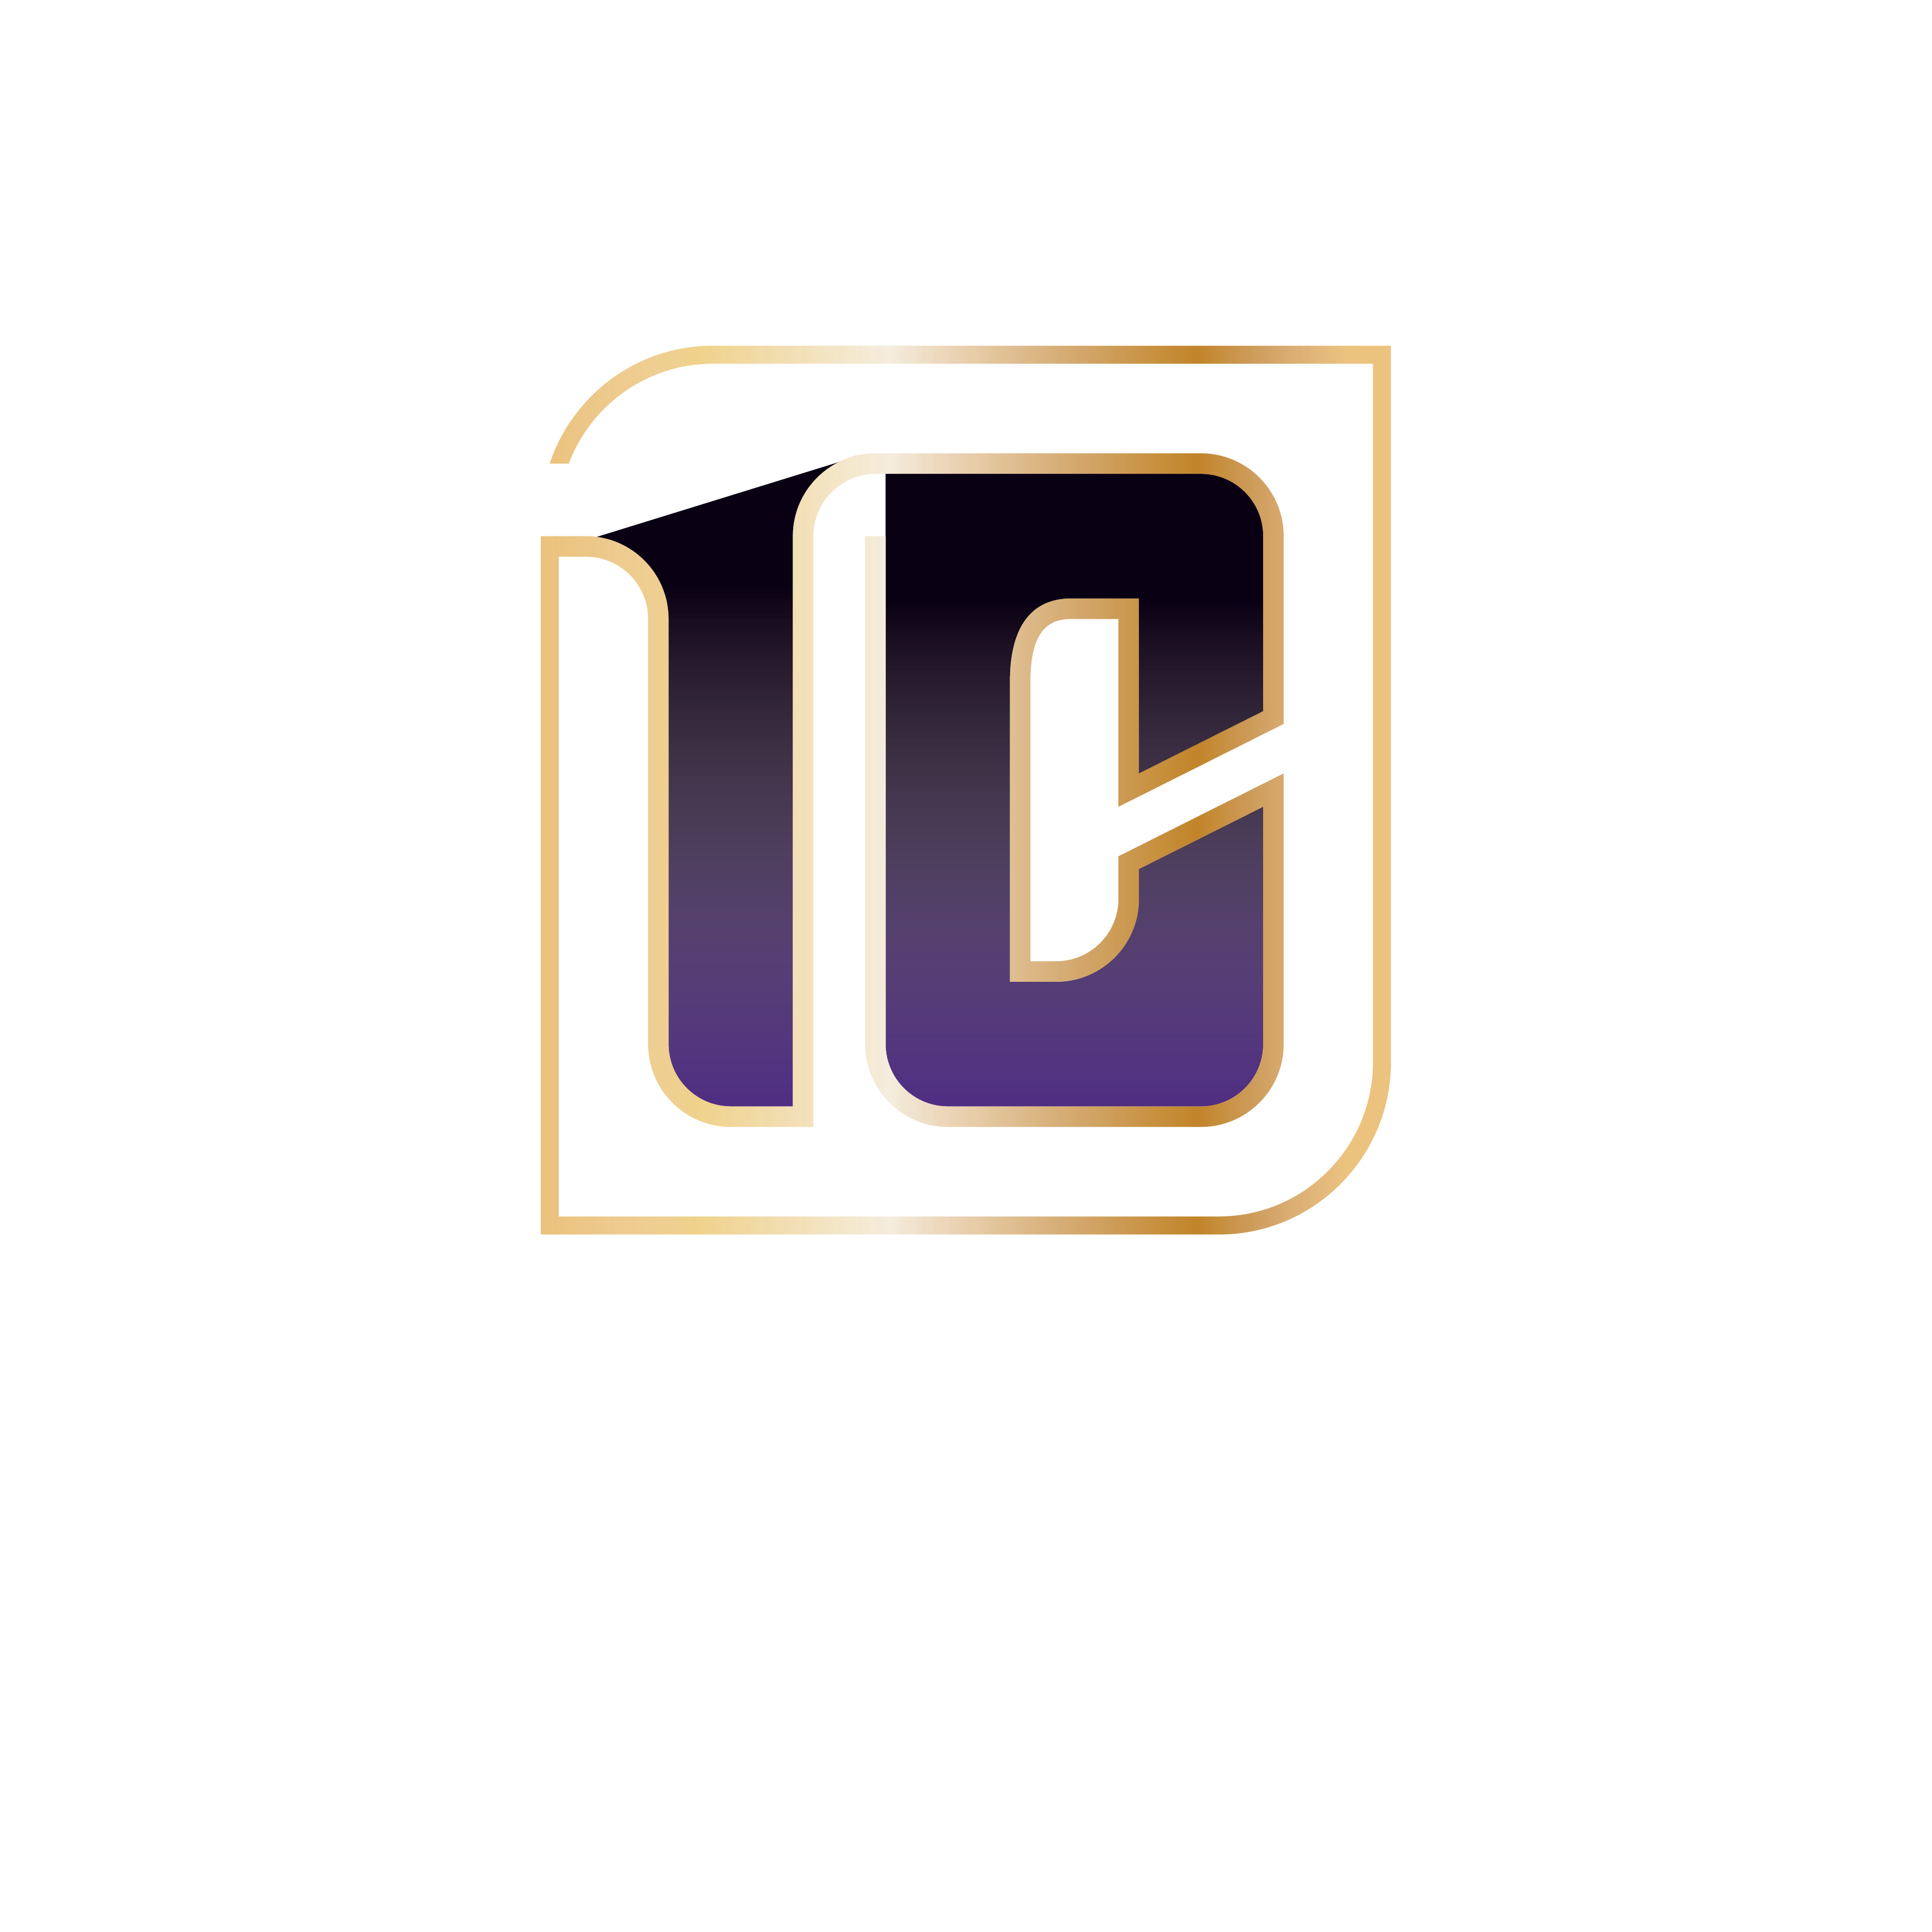 The ink Clinic